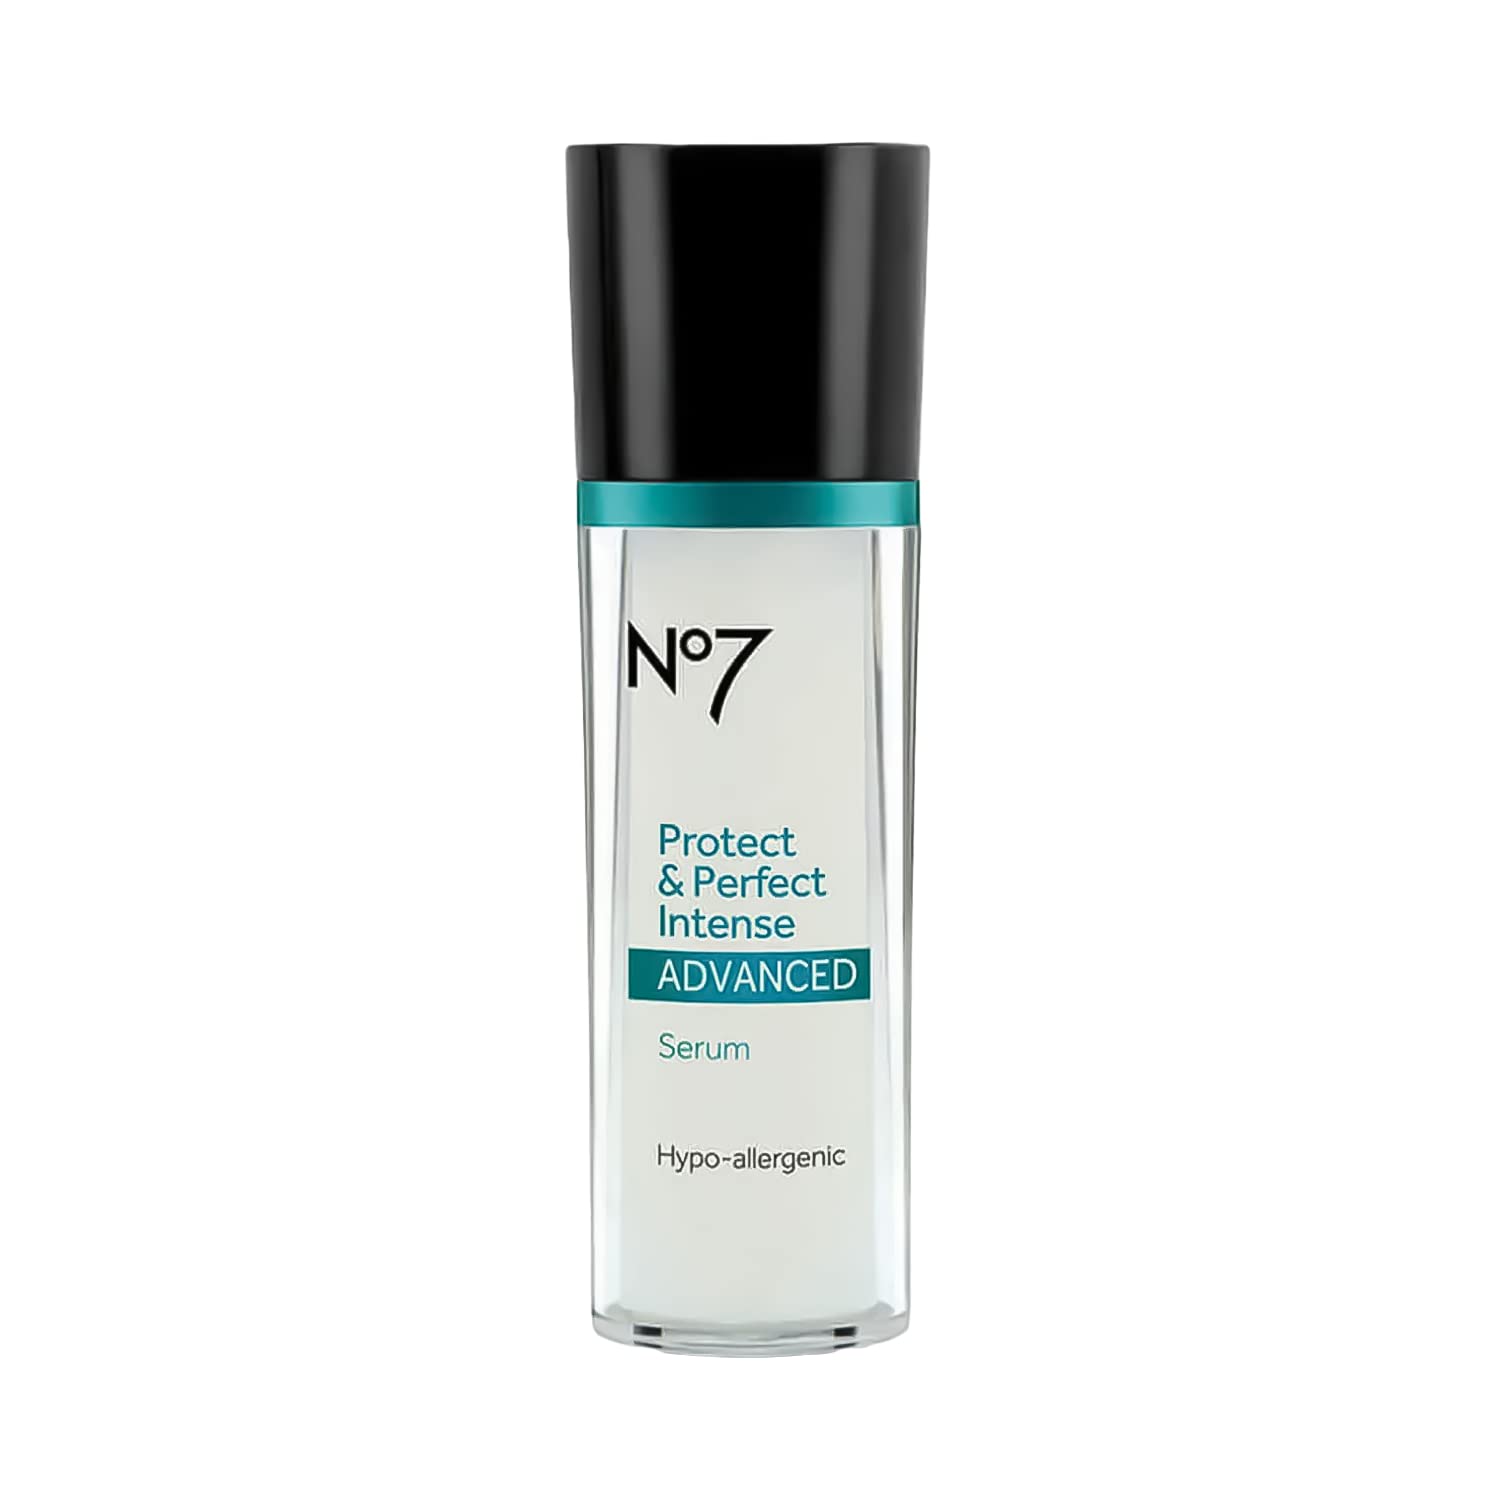 No7 Protect & Perfect Intense Advanced Serum - Hydrating Serum with Hyaluronic Acid - Serum For Wrinkles with Rice Protein & Alfalfa Complex - Anti Aging Face Serum with Matrix 3000+ Technology (1)